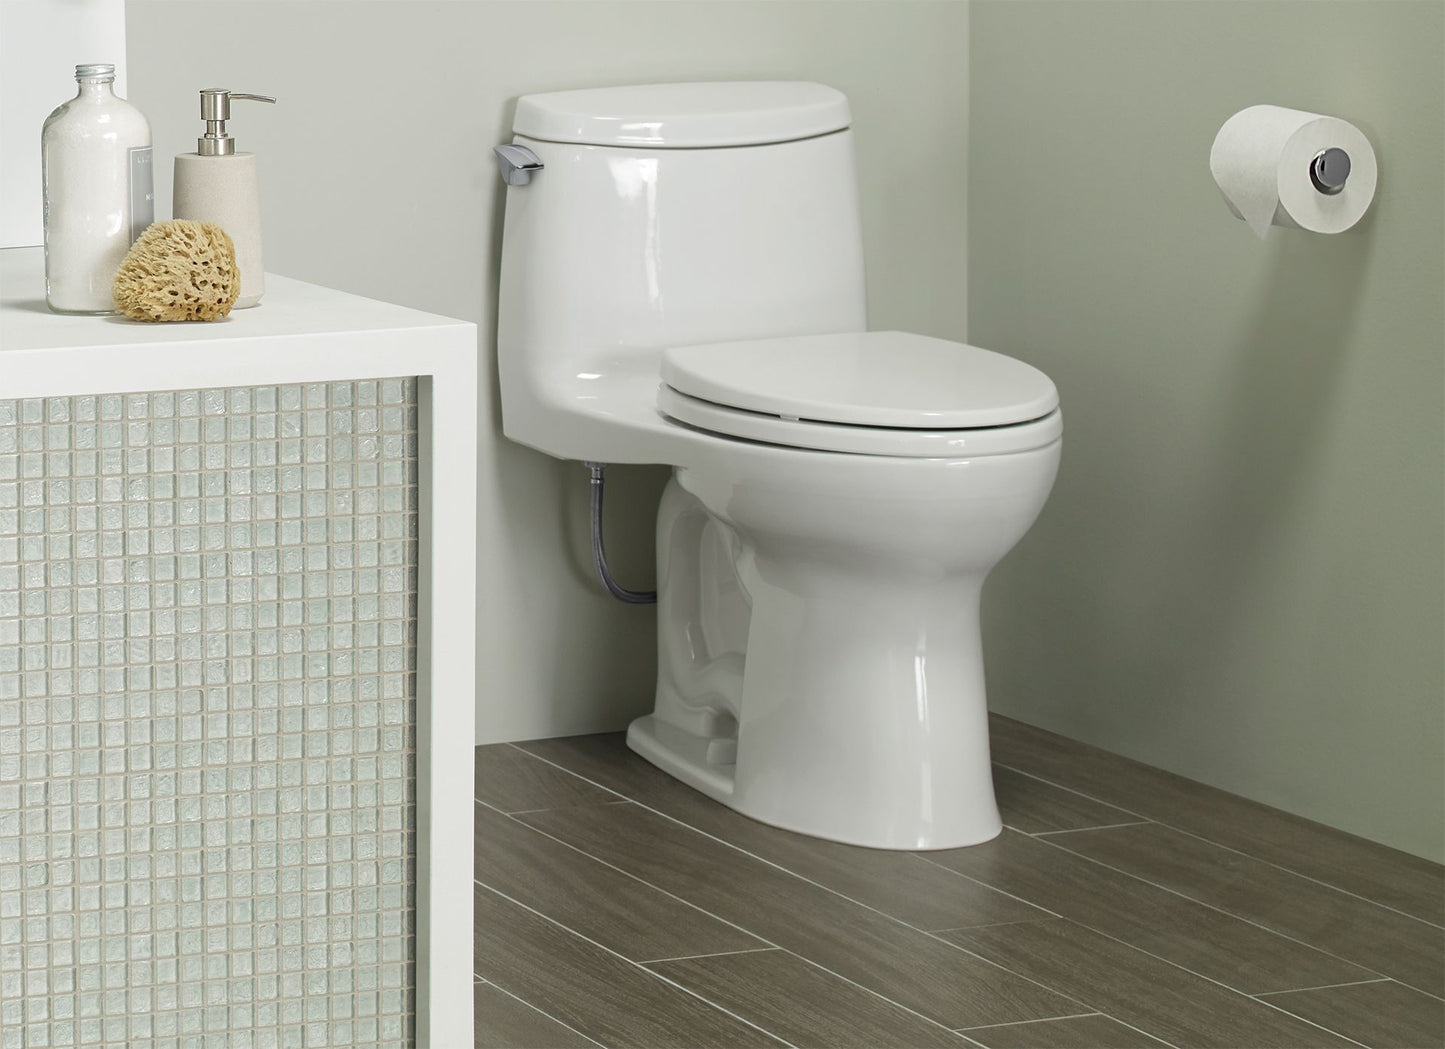 Toto Ultramax II One Piece Toilet, Elongated Bowl 1.28 GPF Height 28.75" Seat Height 17.25" - MS604124CEFG